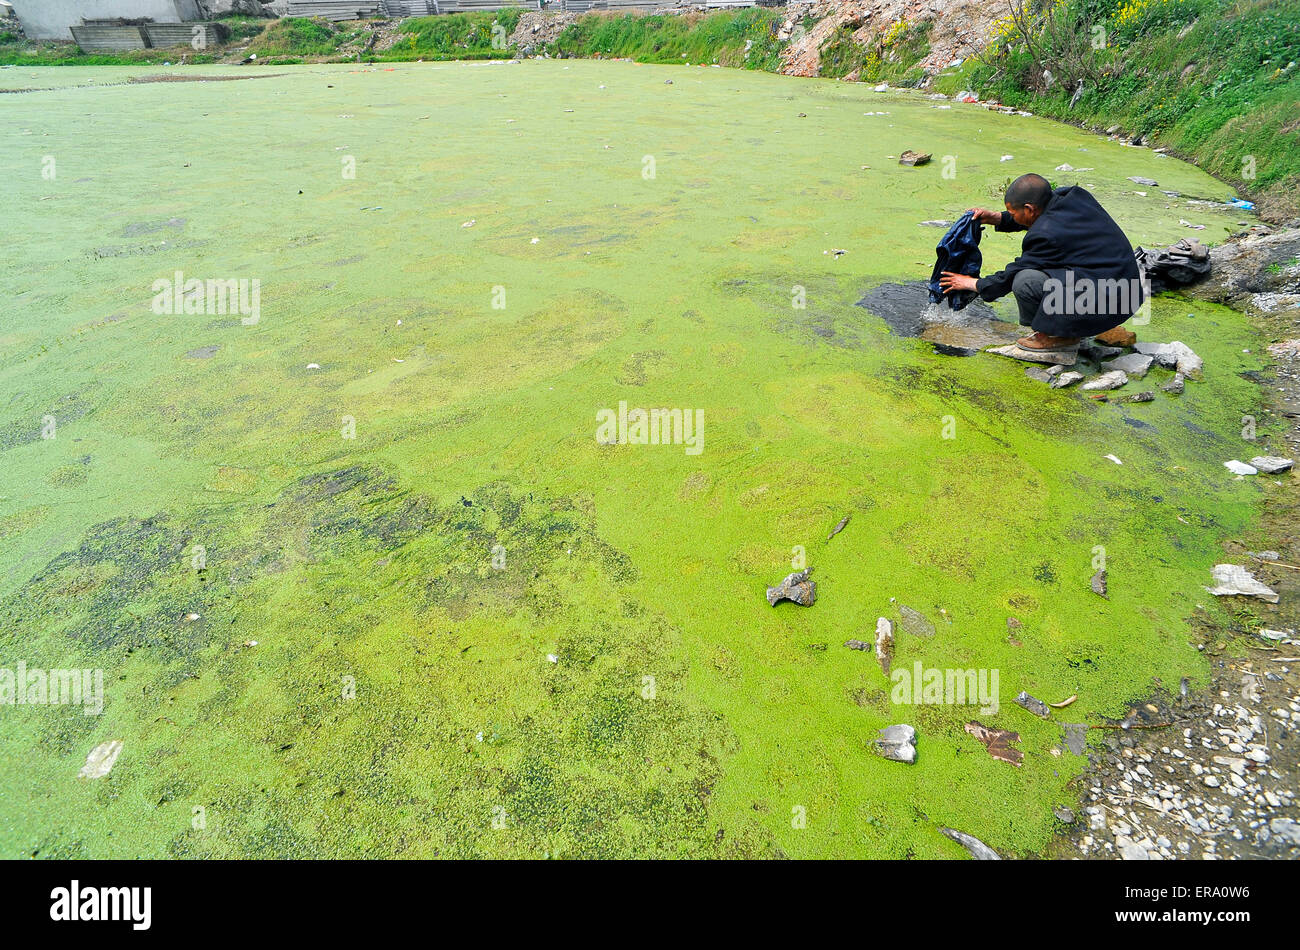 A man washs cloths in a pond in Xiangyang, Hubei province, China on 21 March 2015. Stock Photo